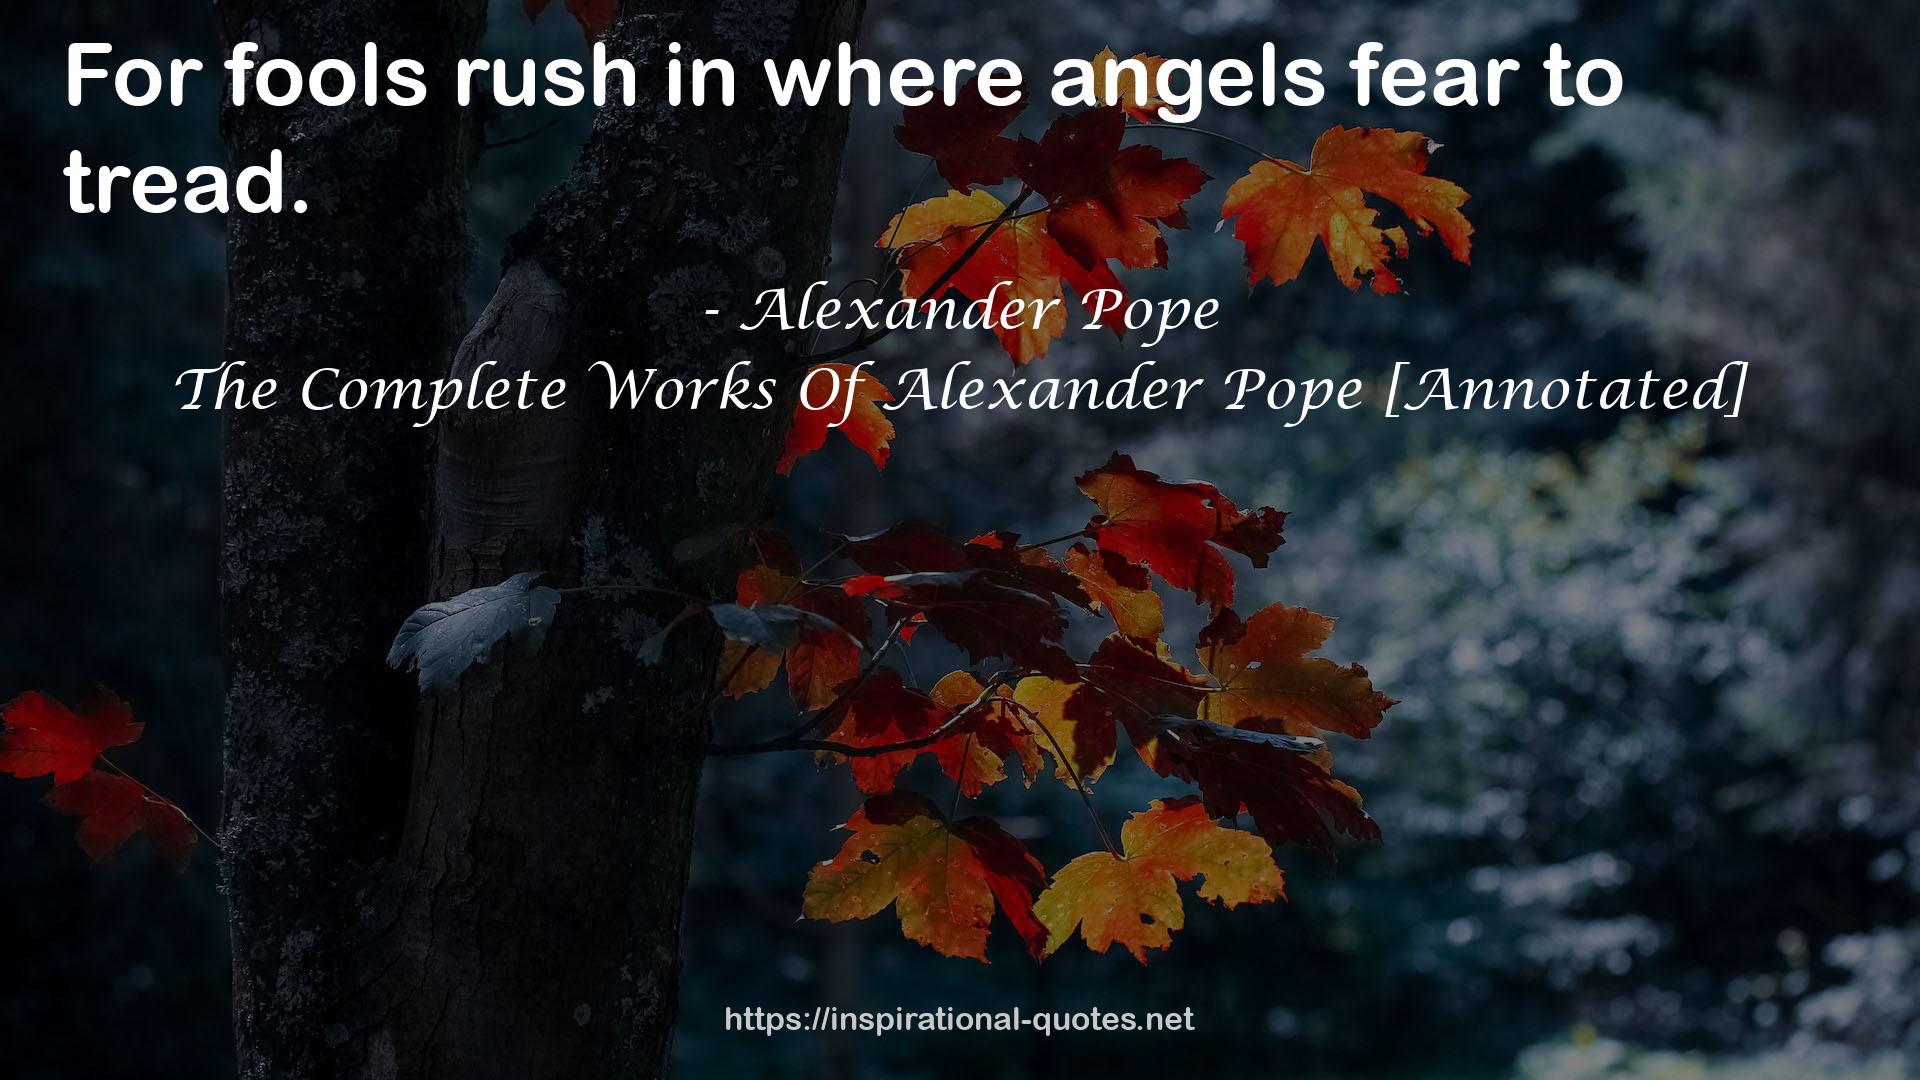 The Complete Works Of Alexander Pope [Annotated] QUOTES